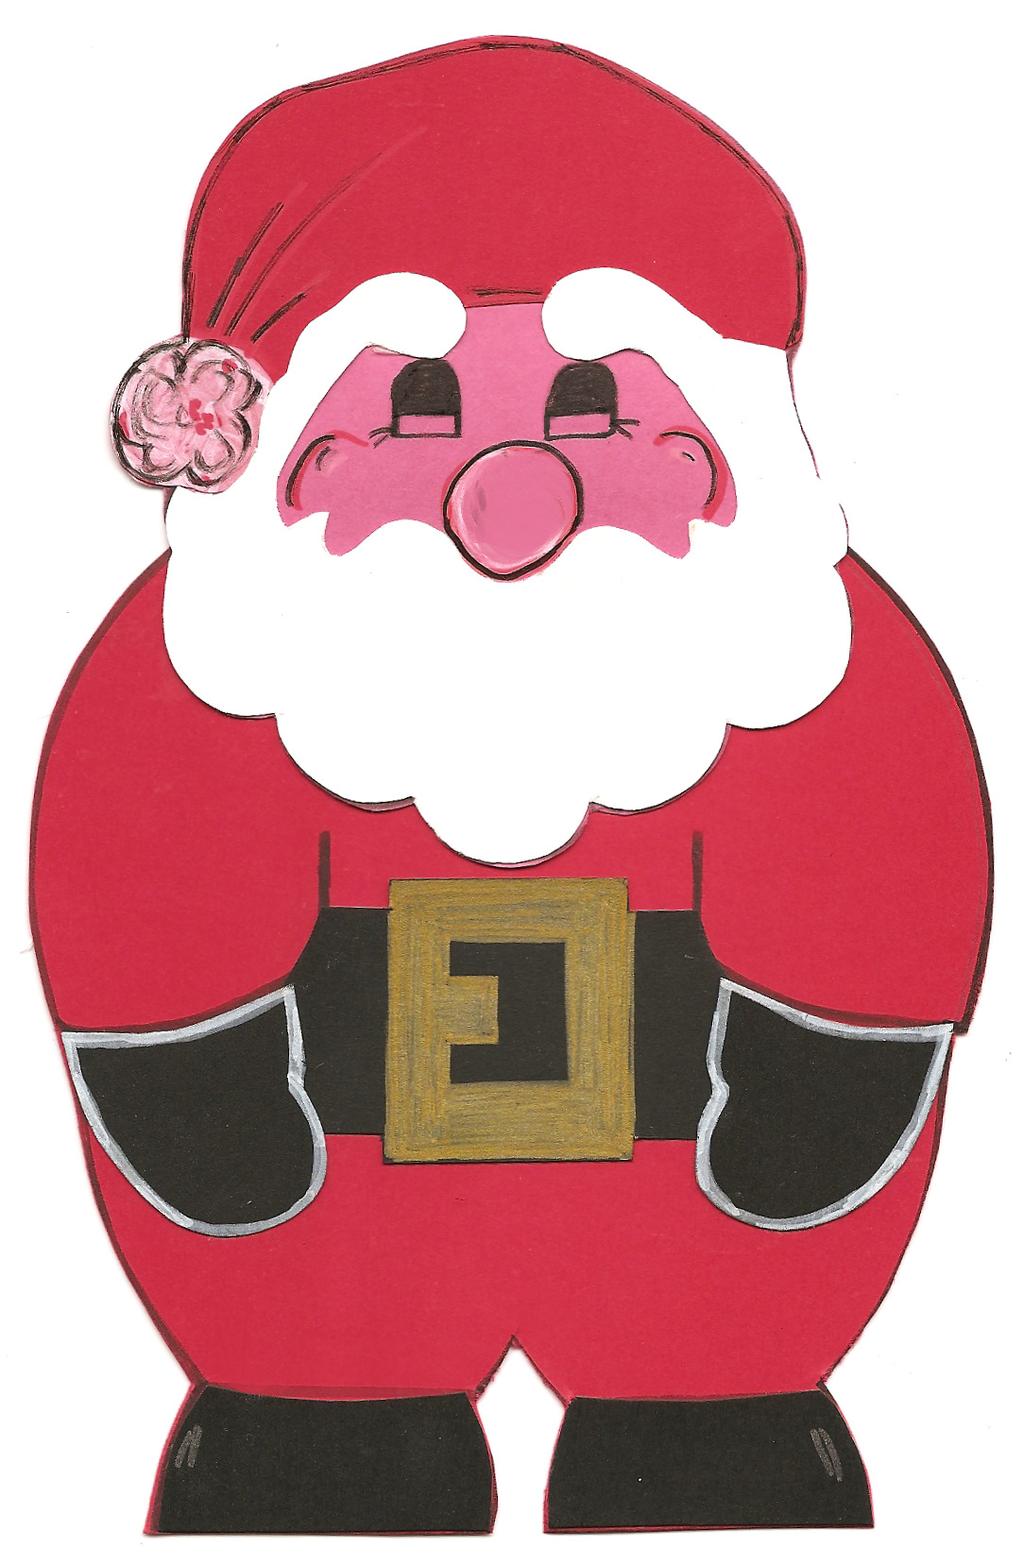 Santa Shaped Card Print off the Santa shaped card template. Cut out the body piece and the head piece cutting around the outermost line only, don t cut into the detail.